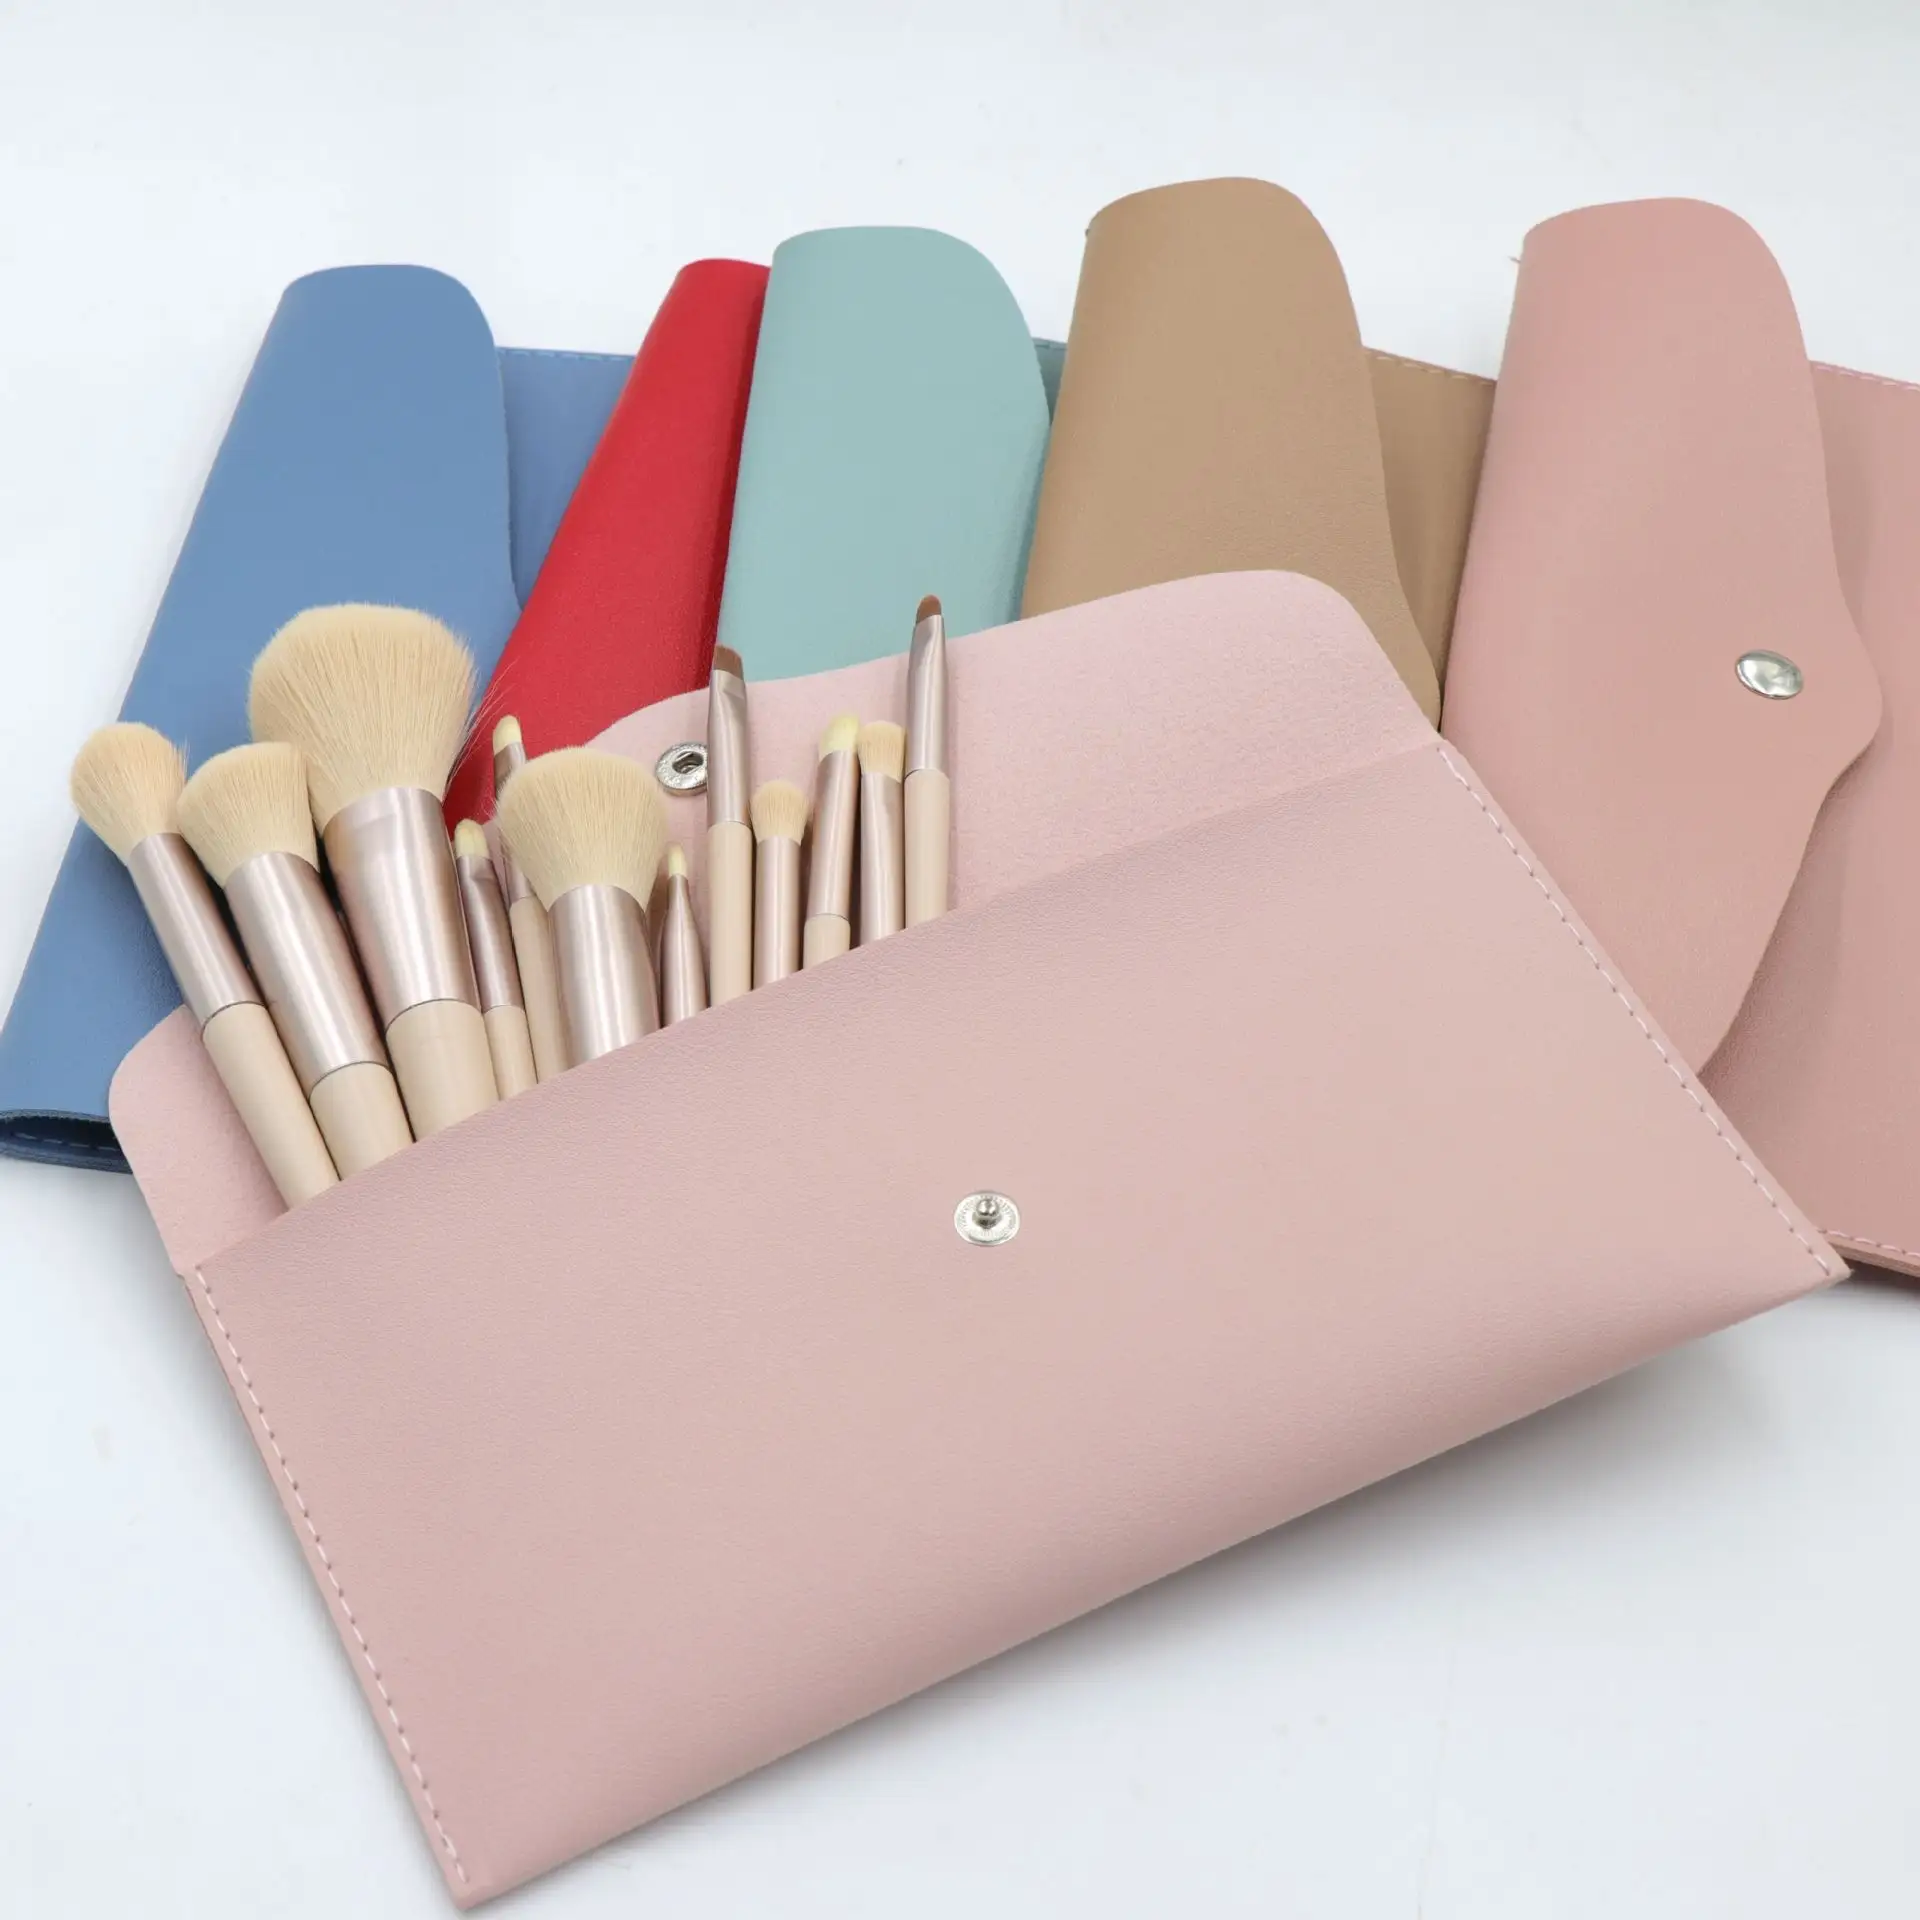 Envelop style makeup brush bag by stackers private label makeup brush bag and travel case